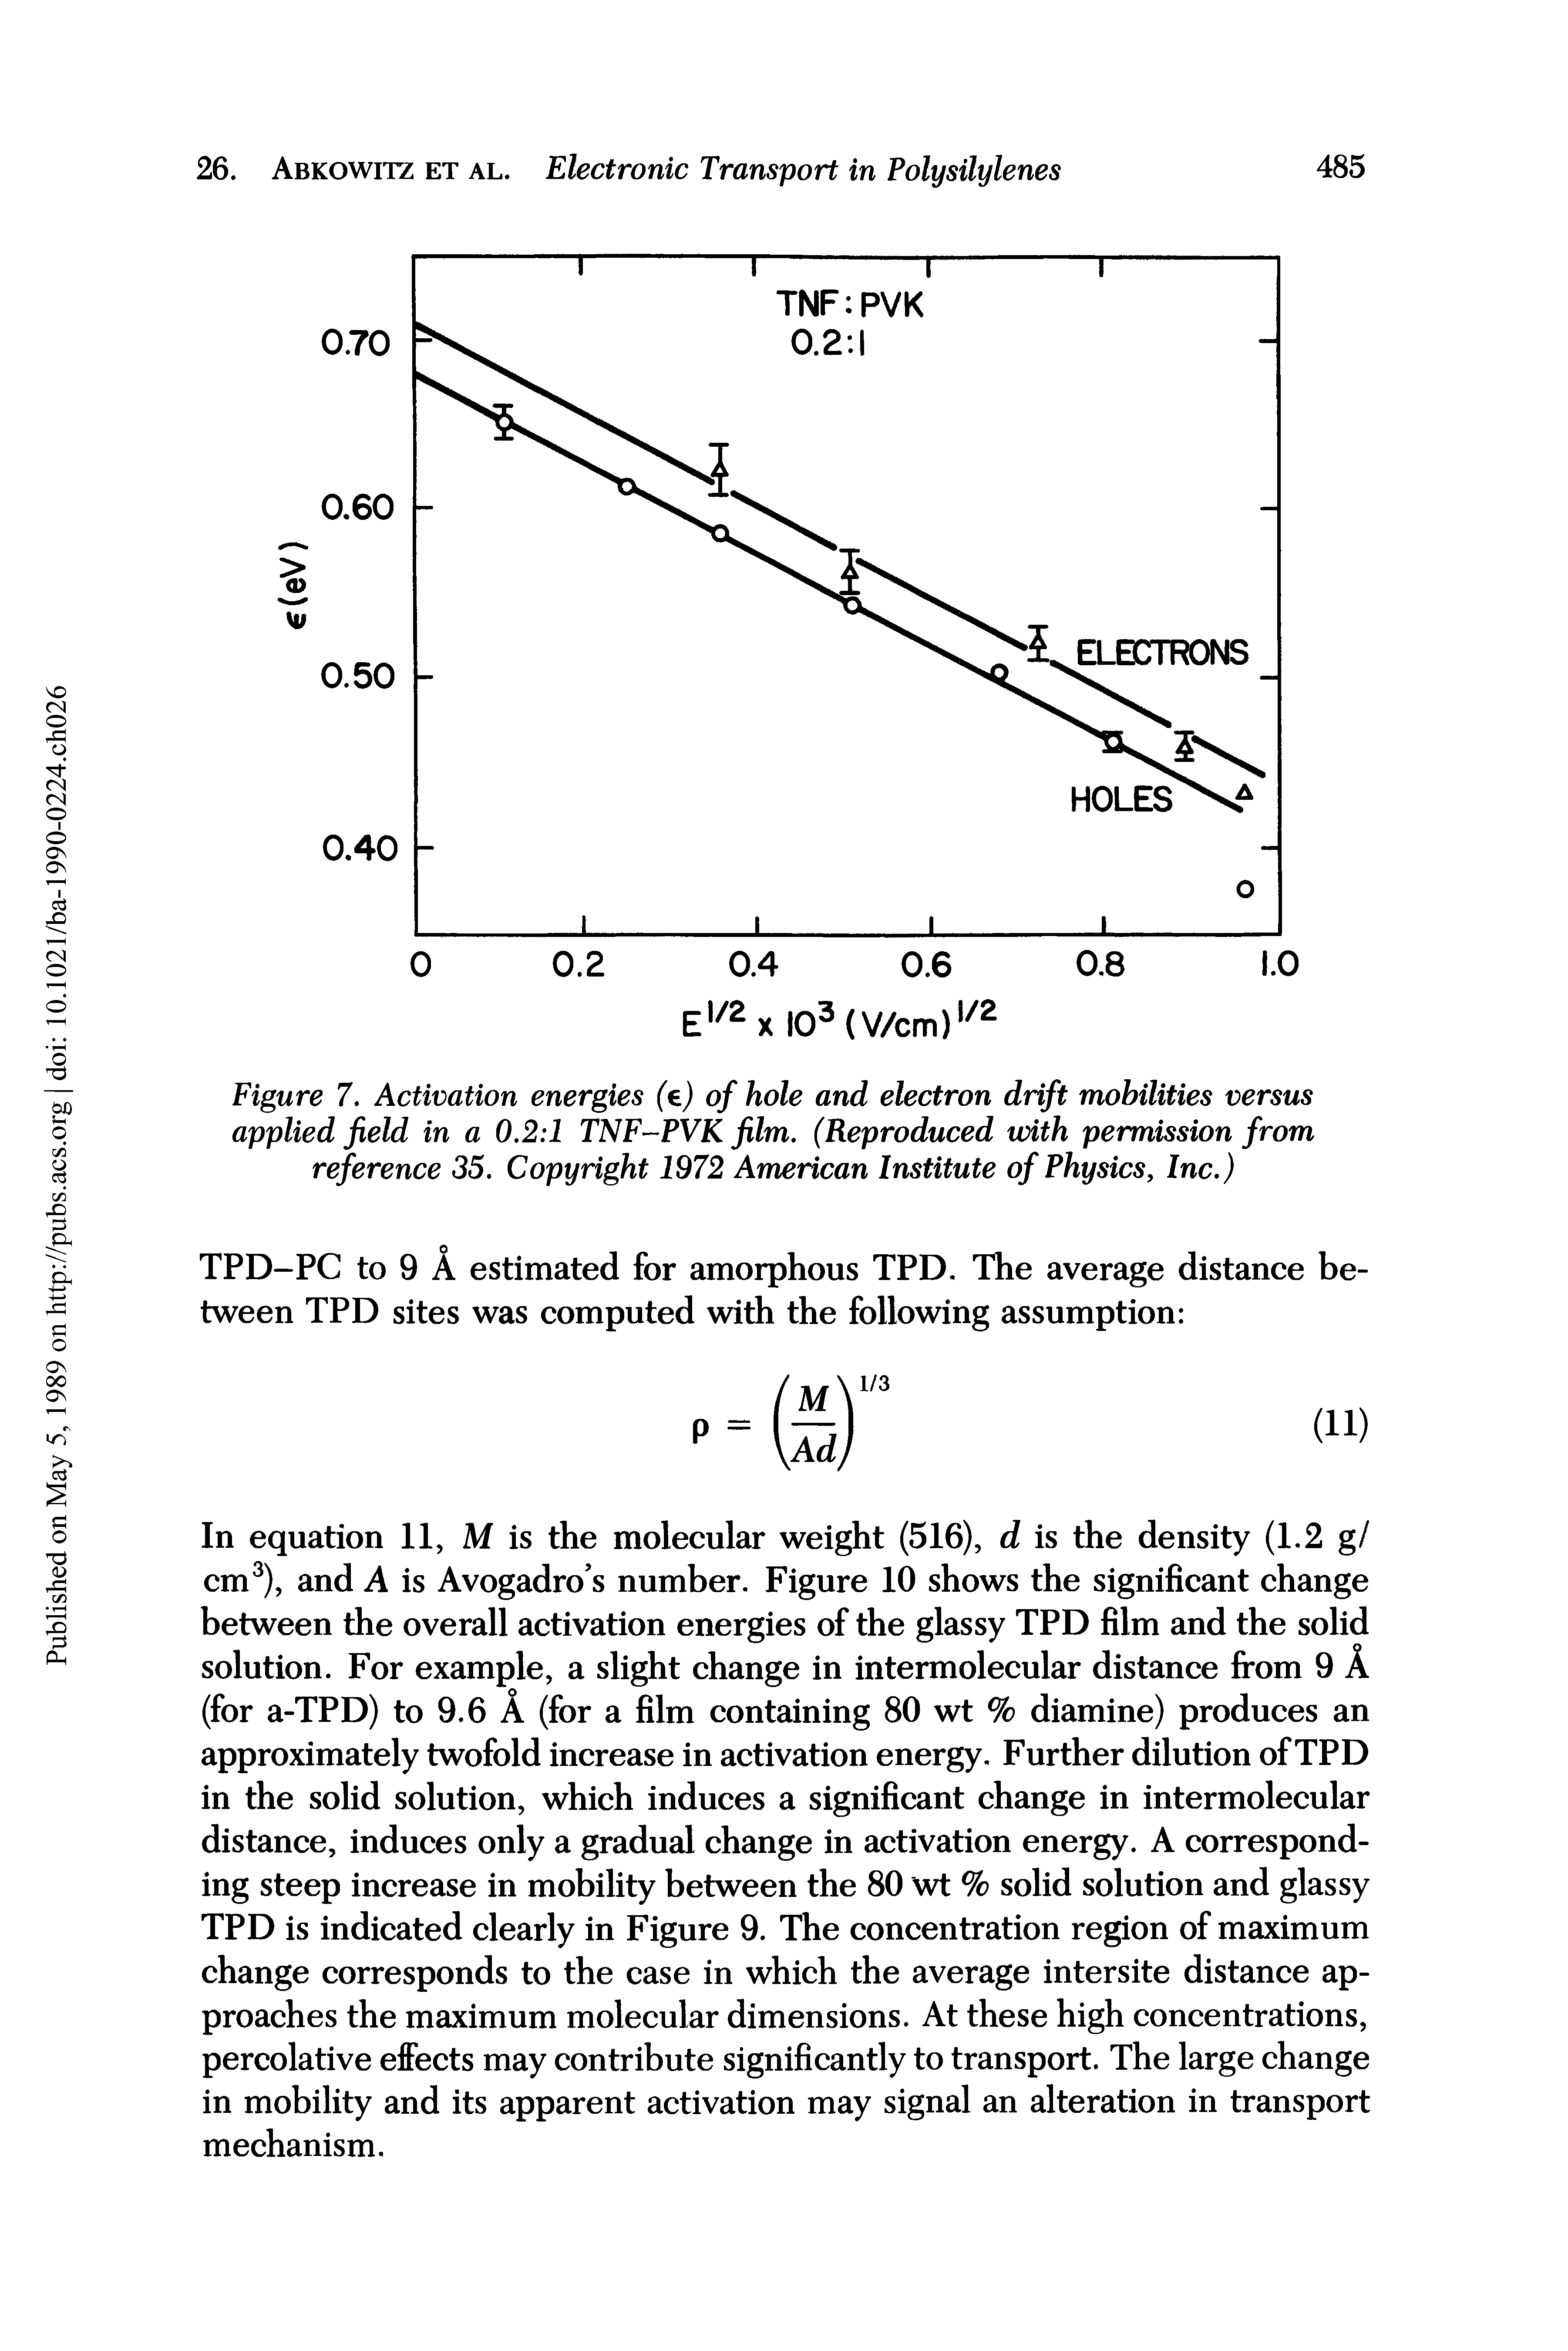 Figure 7, Activation energies (e) of hole and electron drift mobilities versus applied field in a 0.2 1 TNF-PVK film. (Reproduced with permission from reference 35. Copyright 1972 American Institute of Physics, Inc.)...